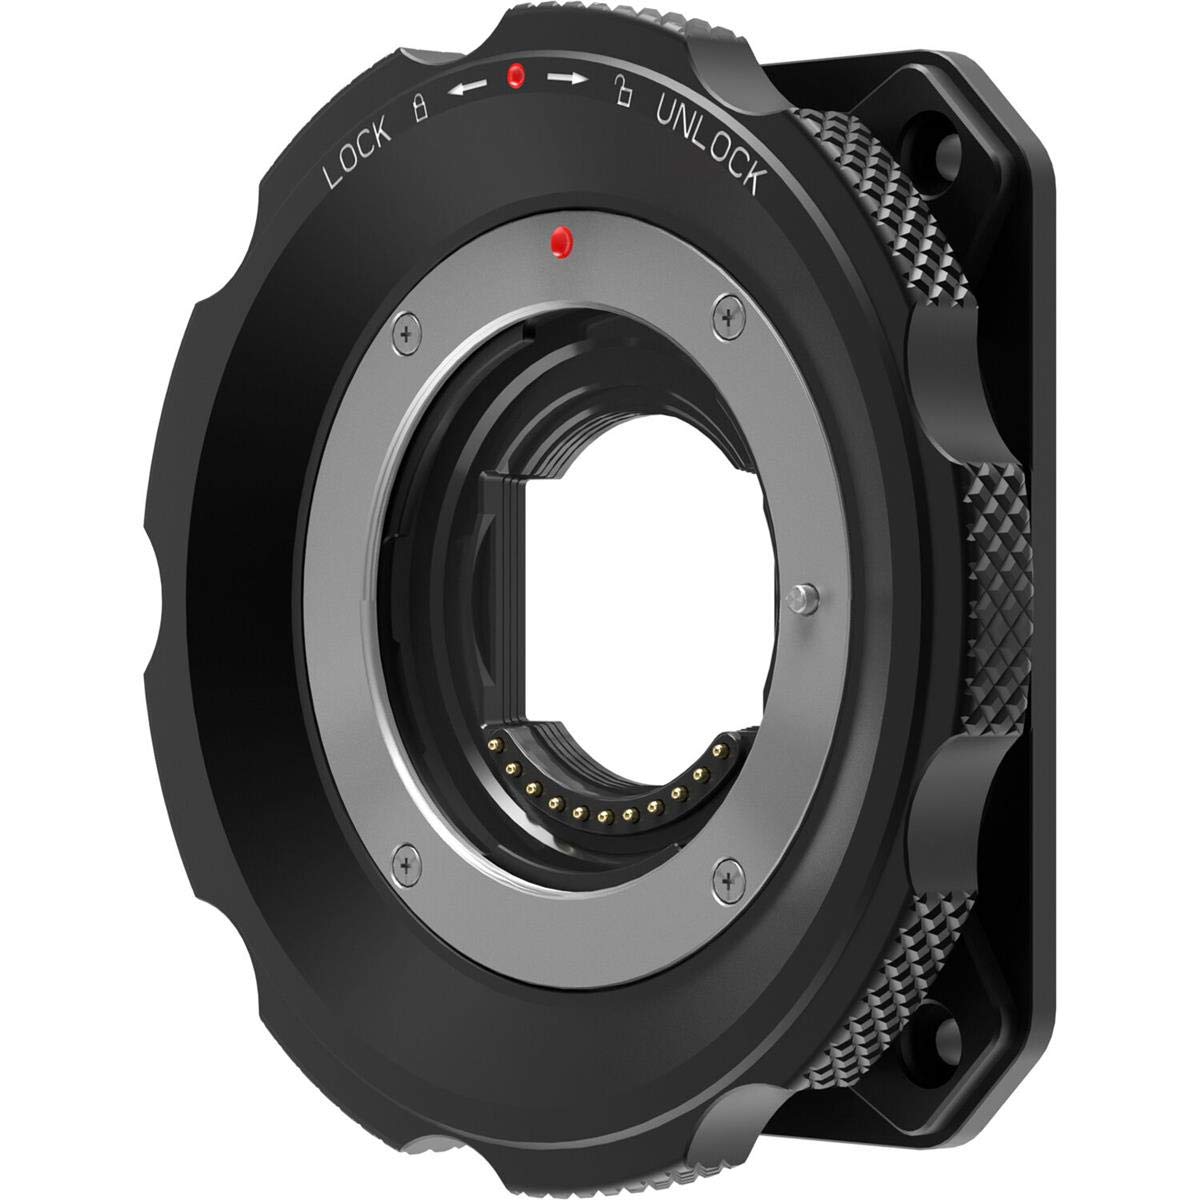 Z CAM E2 MFT Mount with Active Lock